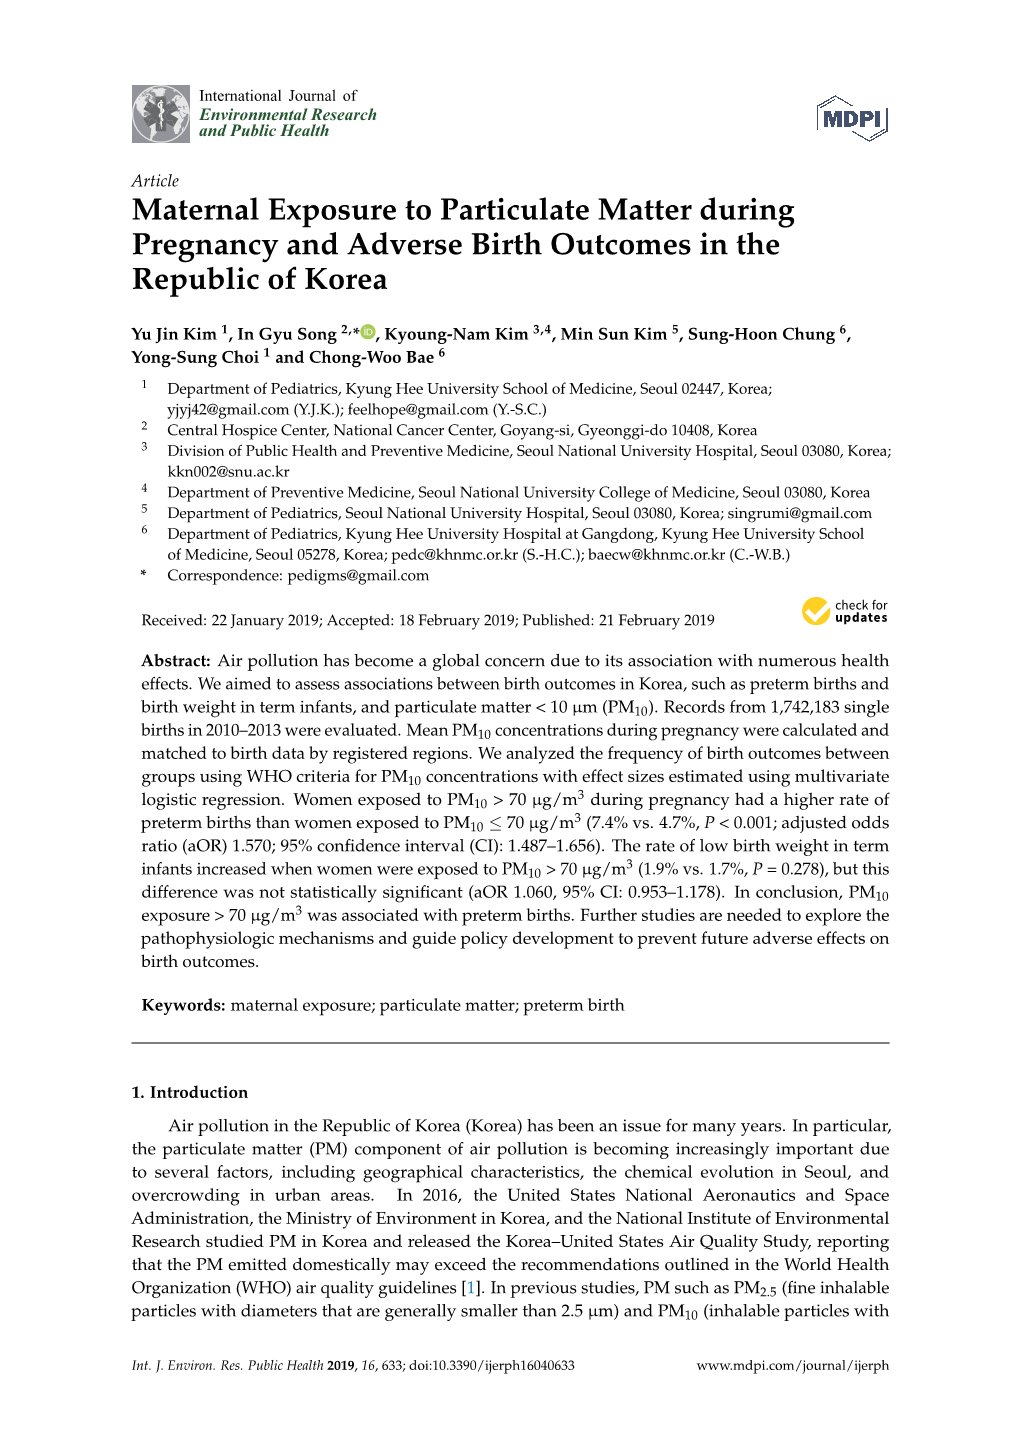 Maternal Exposure to Particulate Matter During Pregnancy and Adverse Birth Outcomes in the Republic of Korea